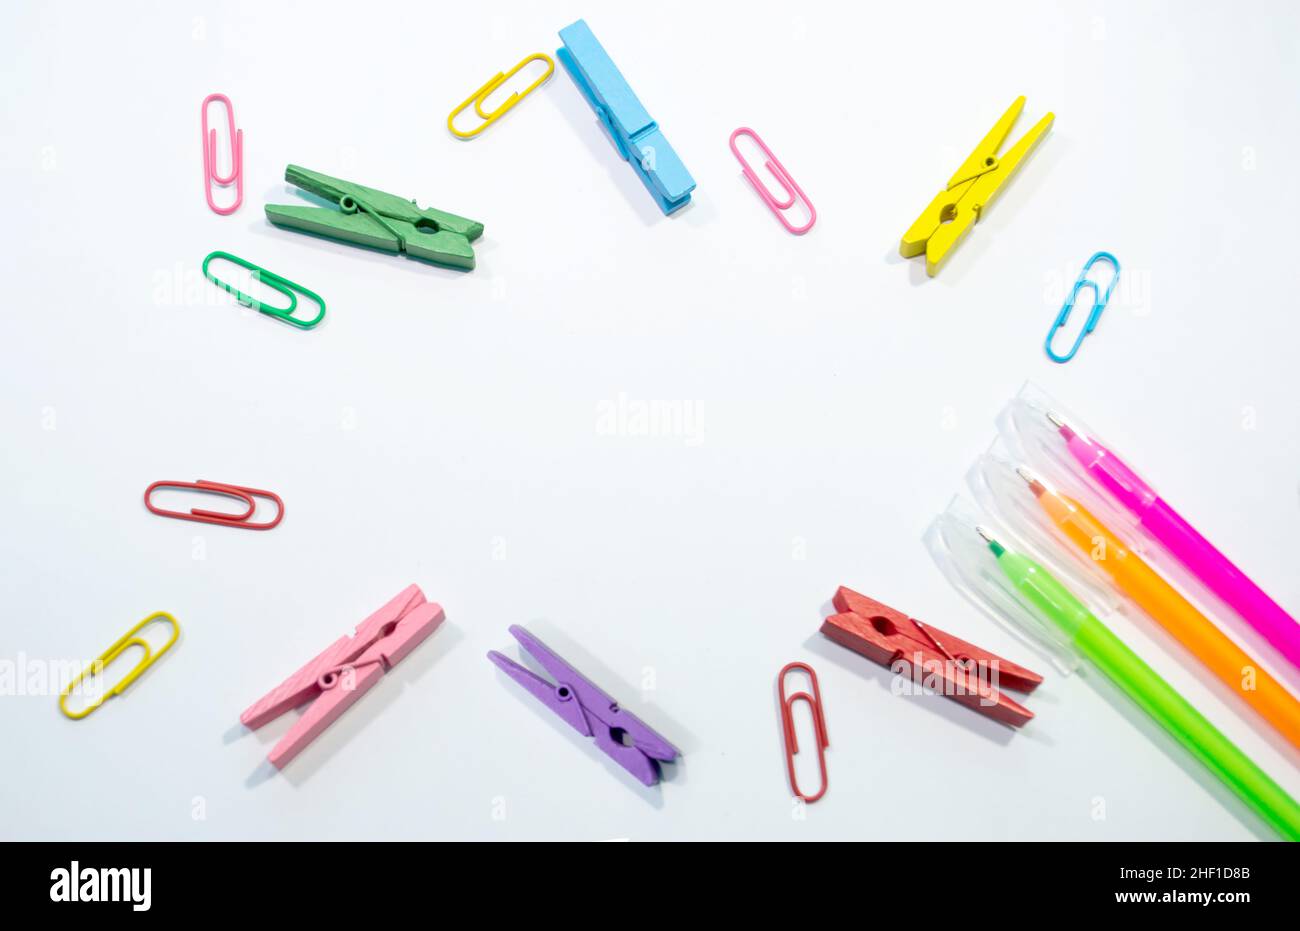 Set of colorful paper clips with white copy space background. Business creativity concepts. Flat lay design, can be used for presentation slides. Stock Photo